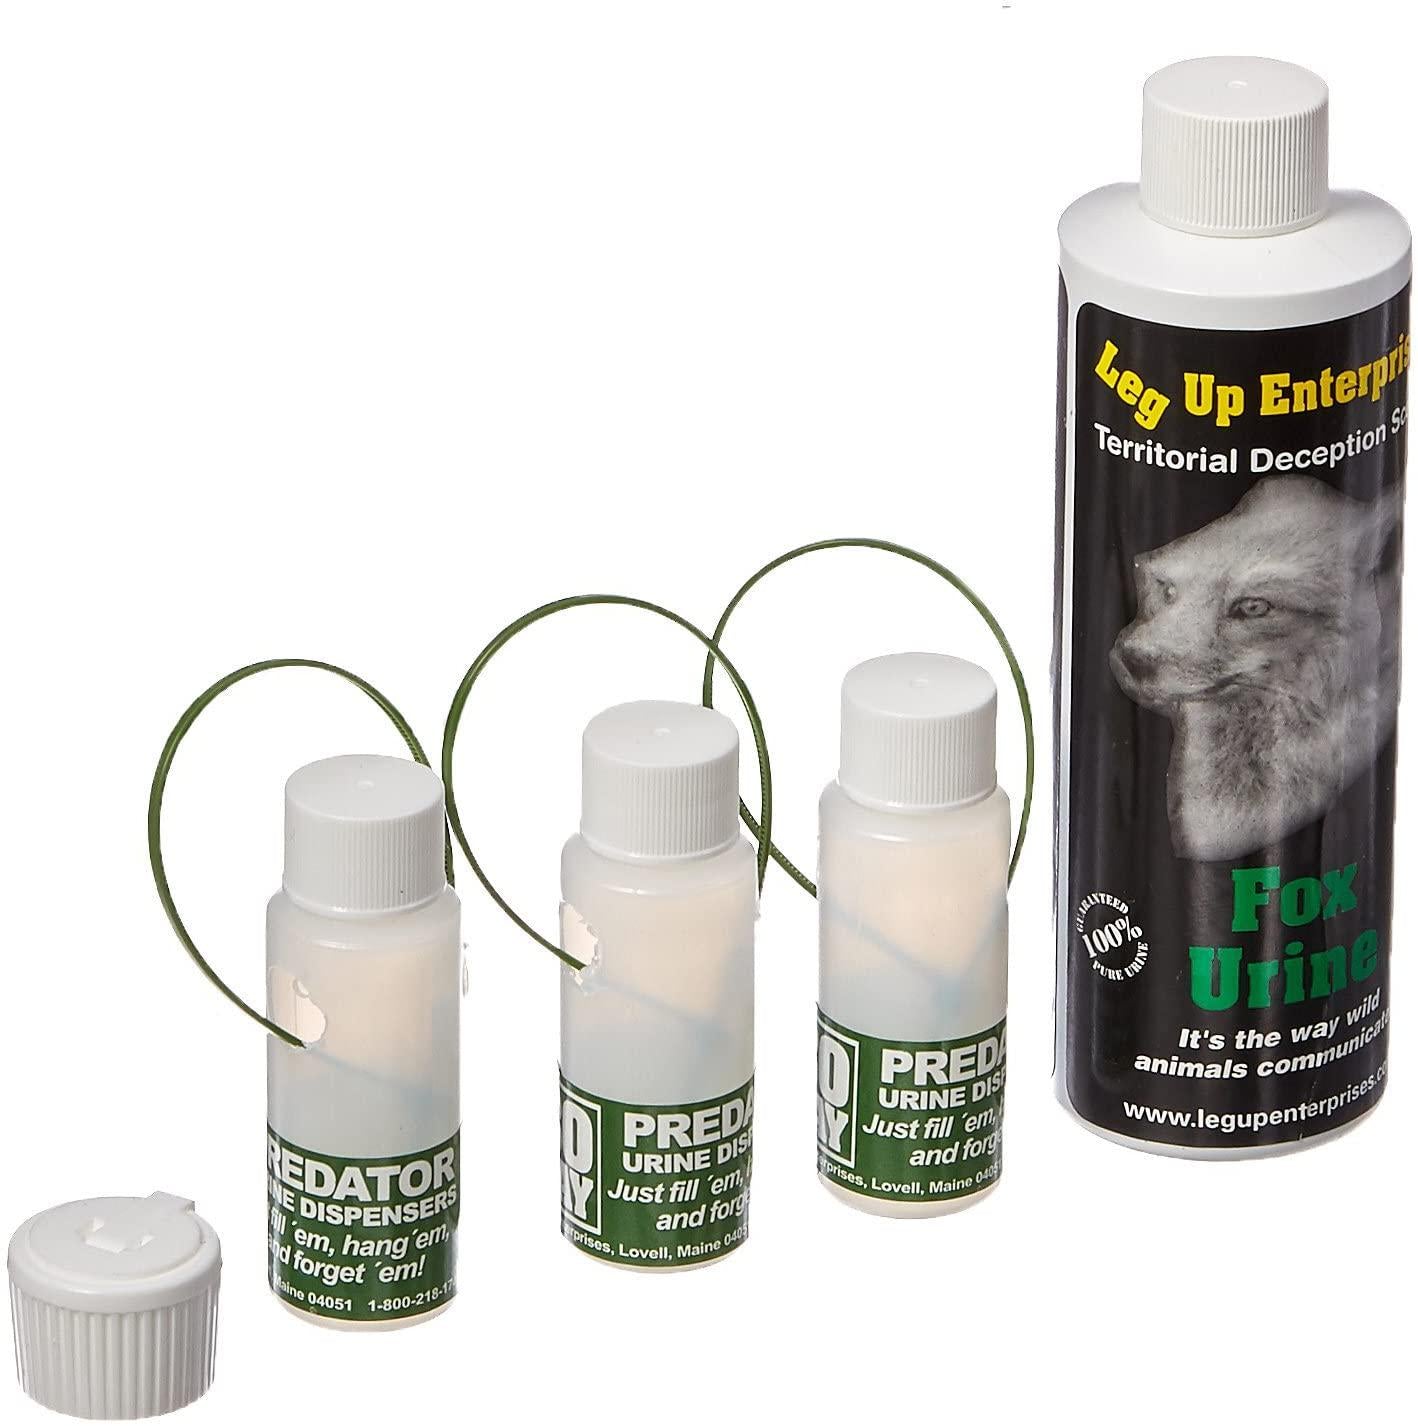 A Leg Up, Leg Up Fox Urine with 3 30 Day Dispensers, 8-Ounce - 91006